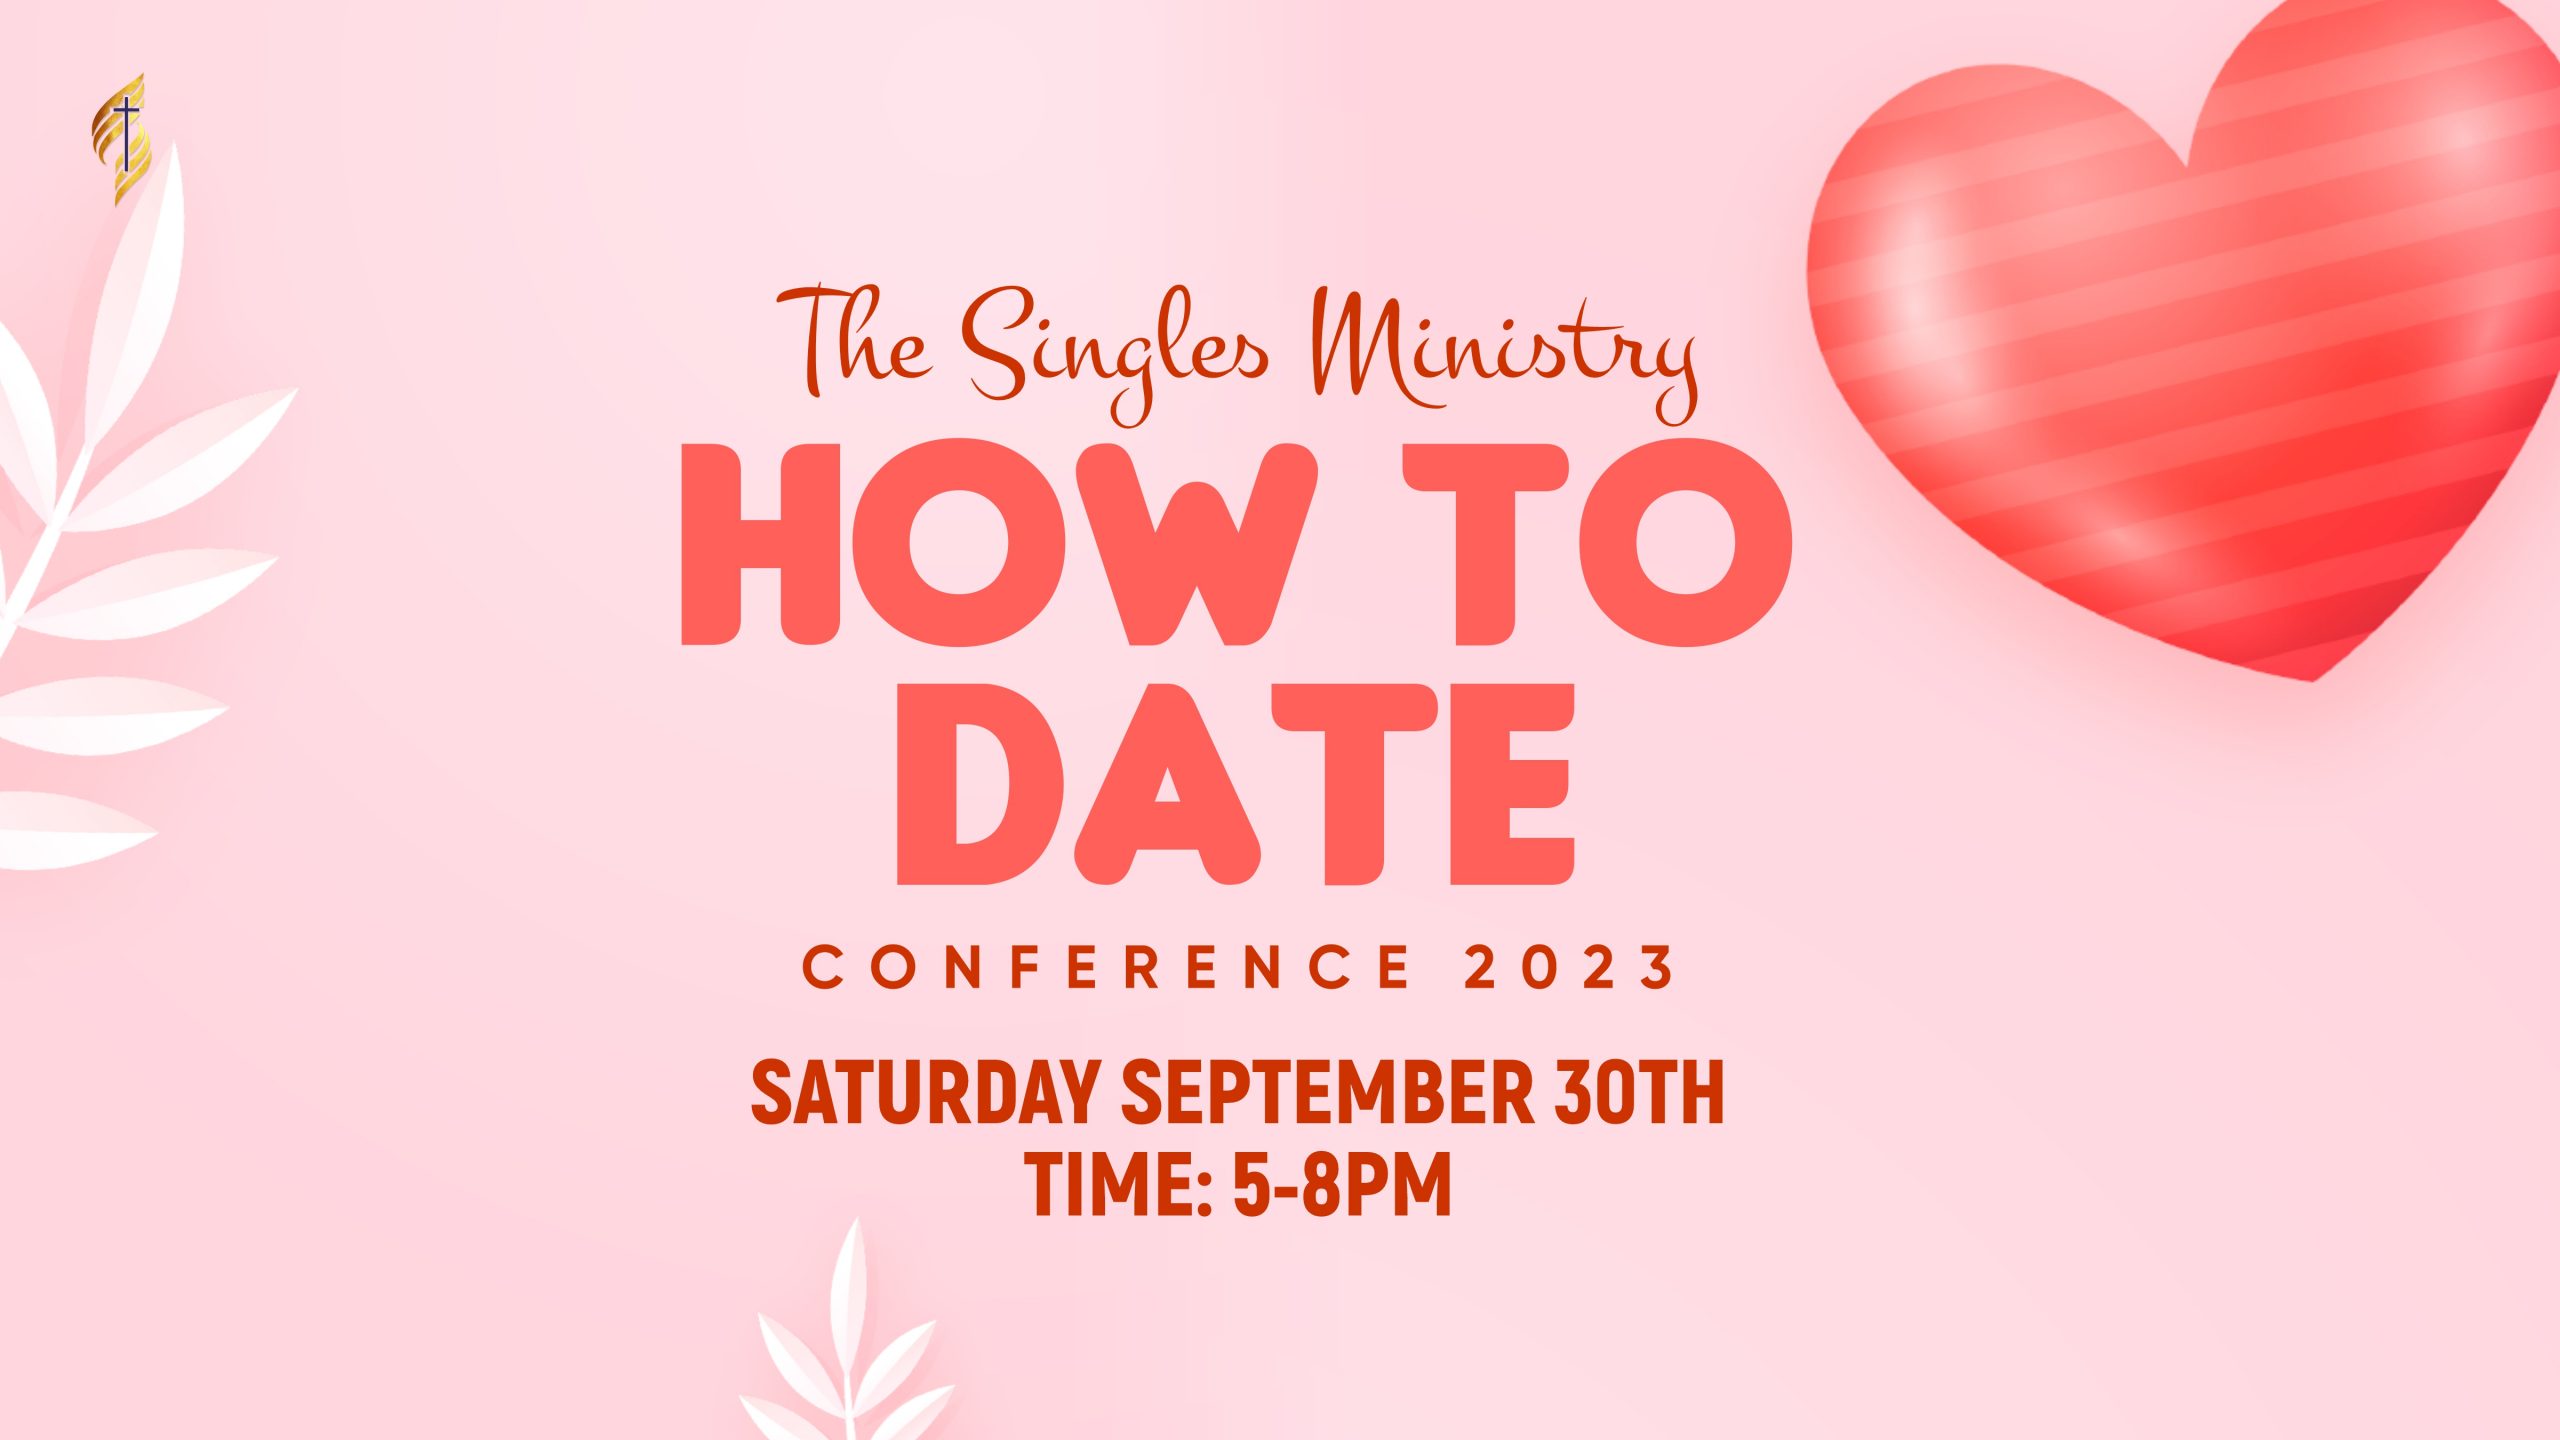 The Single Ministry: How to Date Conference